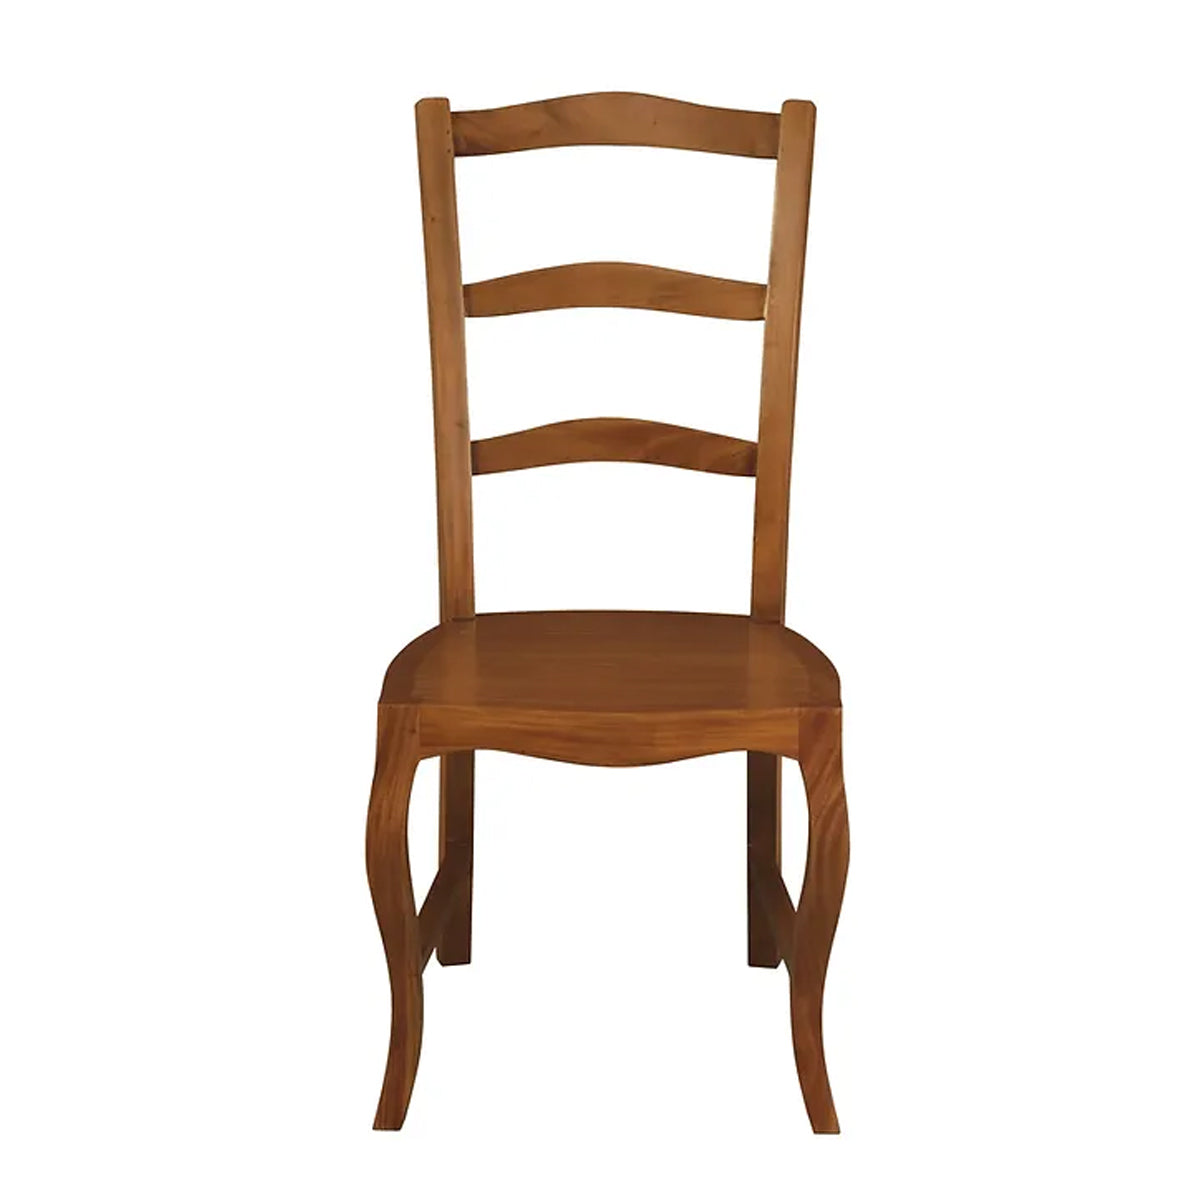 Set of 2 Coita French Provincial Dining Chair With Cushion - Light Pecan